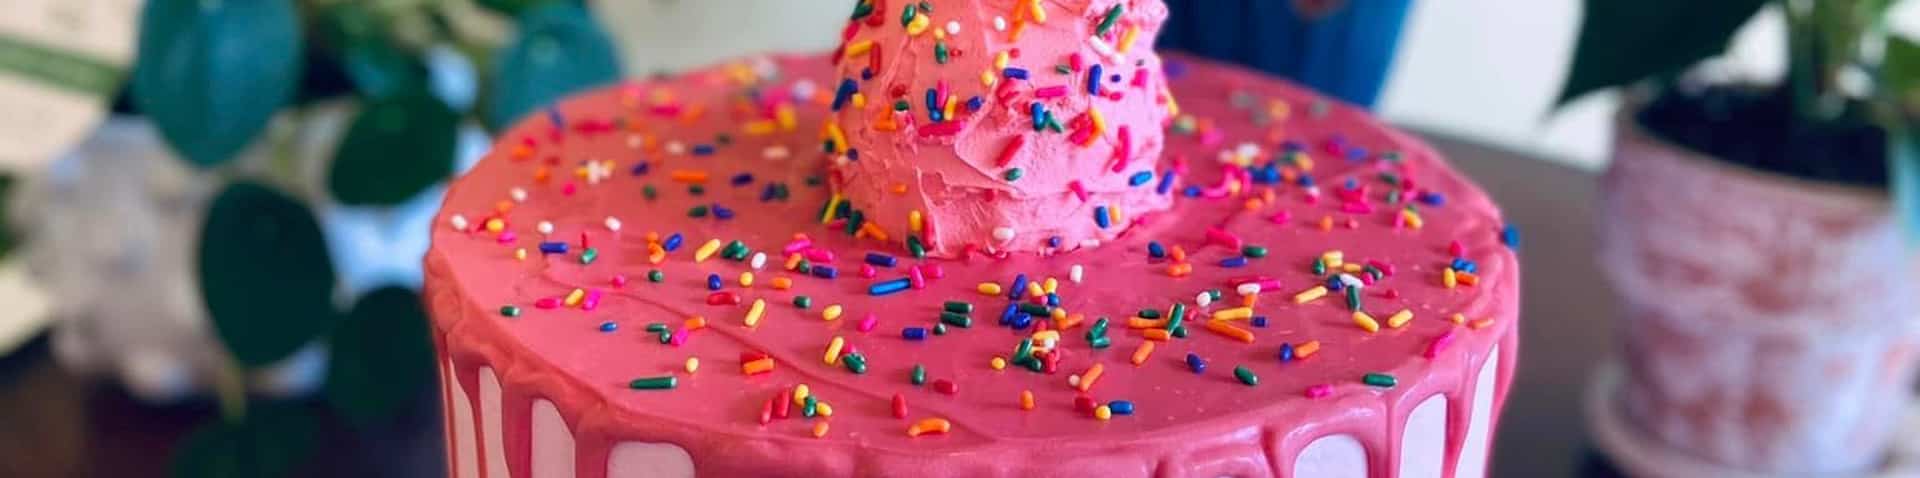 pink cake with ice cream decorations